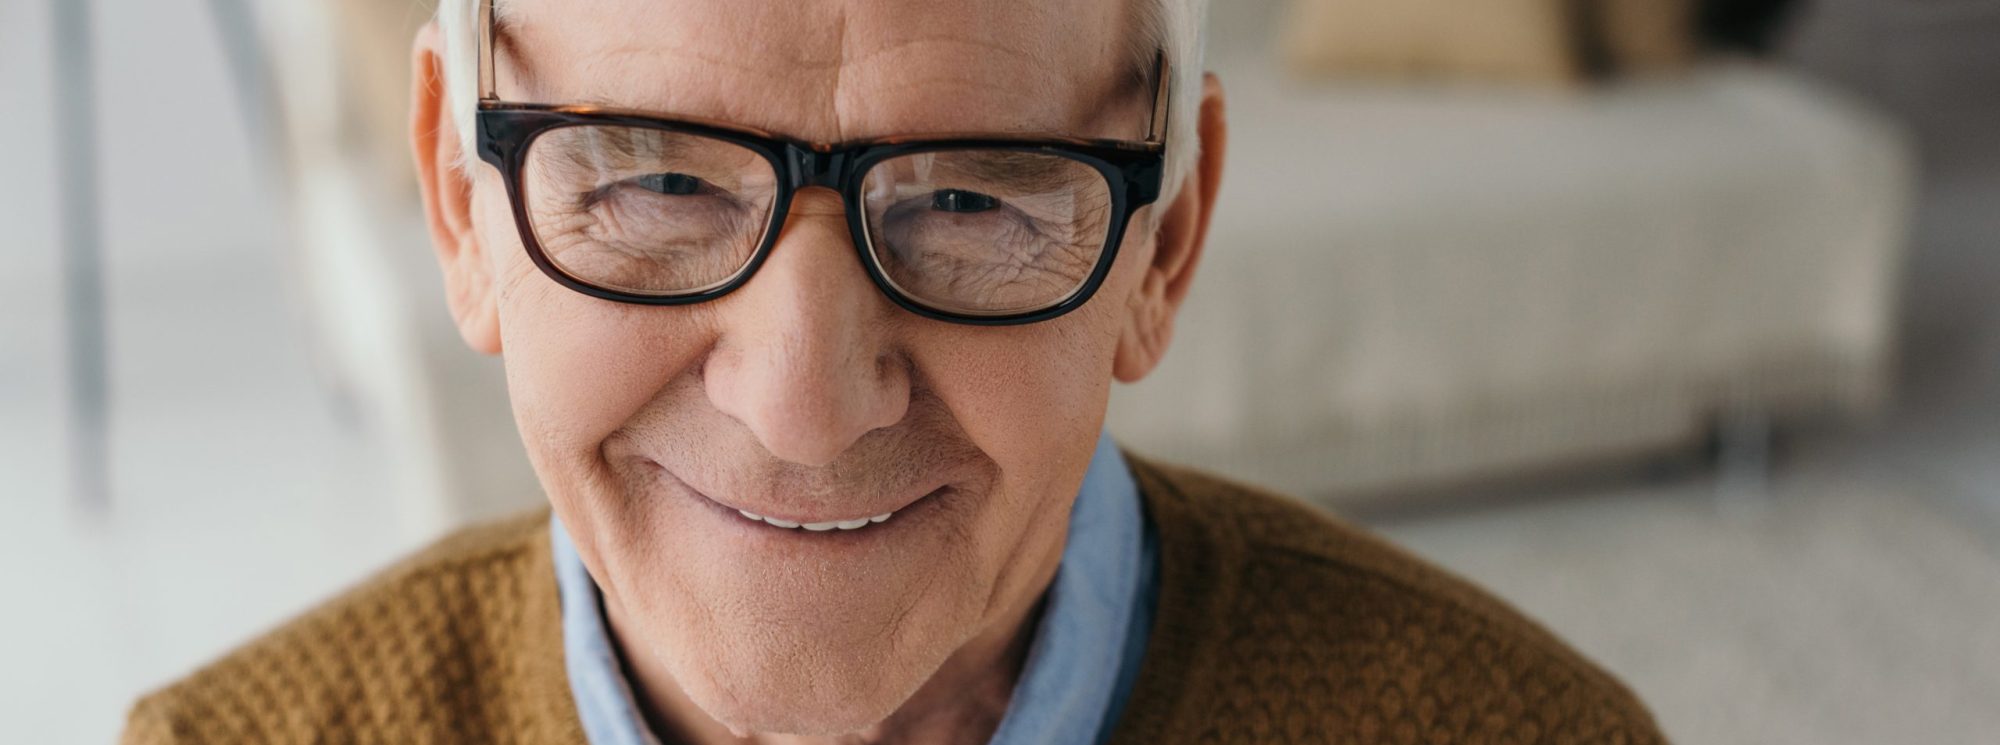 A close up portrait of an older man wearing glasses.